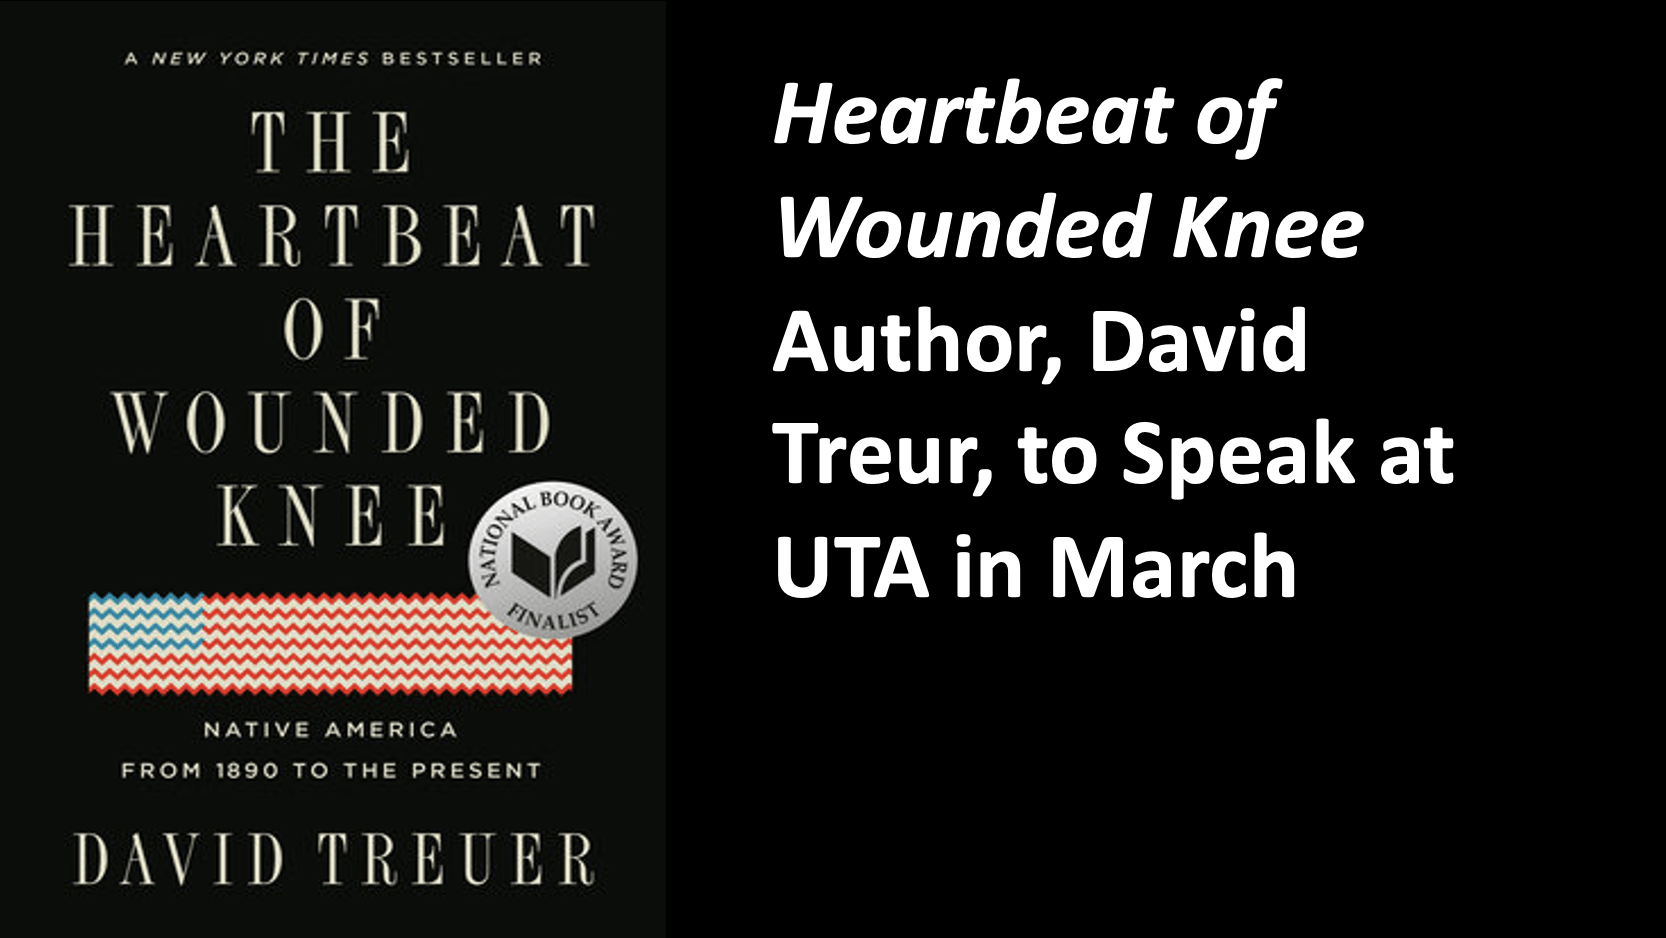 Image of the book The Heartbeat of Wounded Knee with script saying: Heartbeat of Wounded Knee author, David Treur, to Speak at UTA in March.